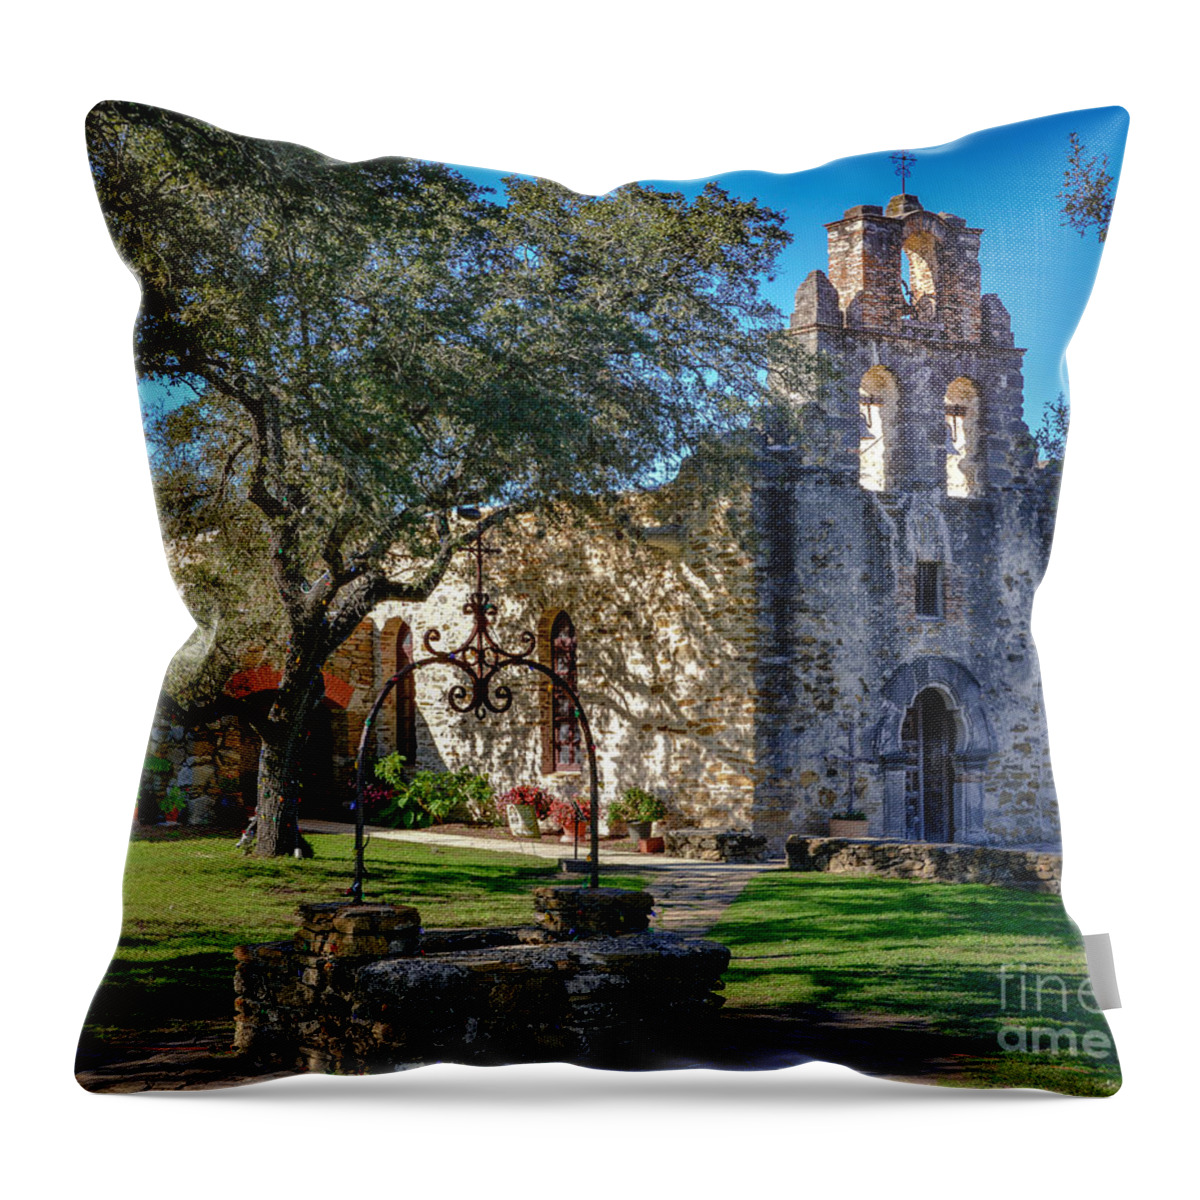 Mission Throw Pillow featuring the pyrography Mission Espada by David Meznarich